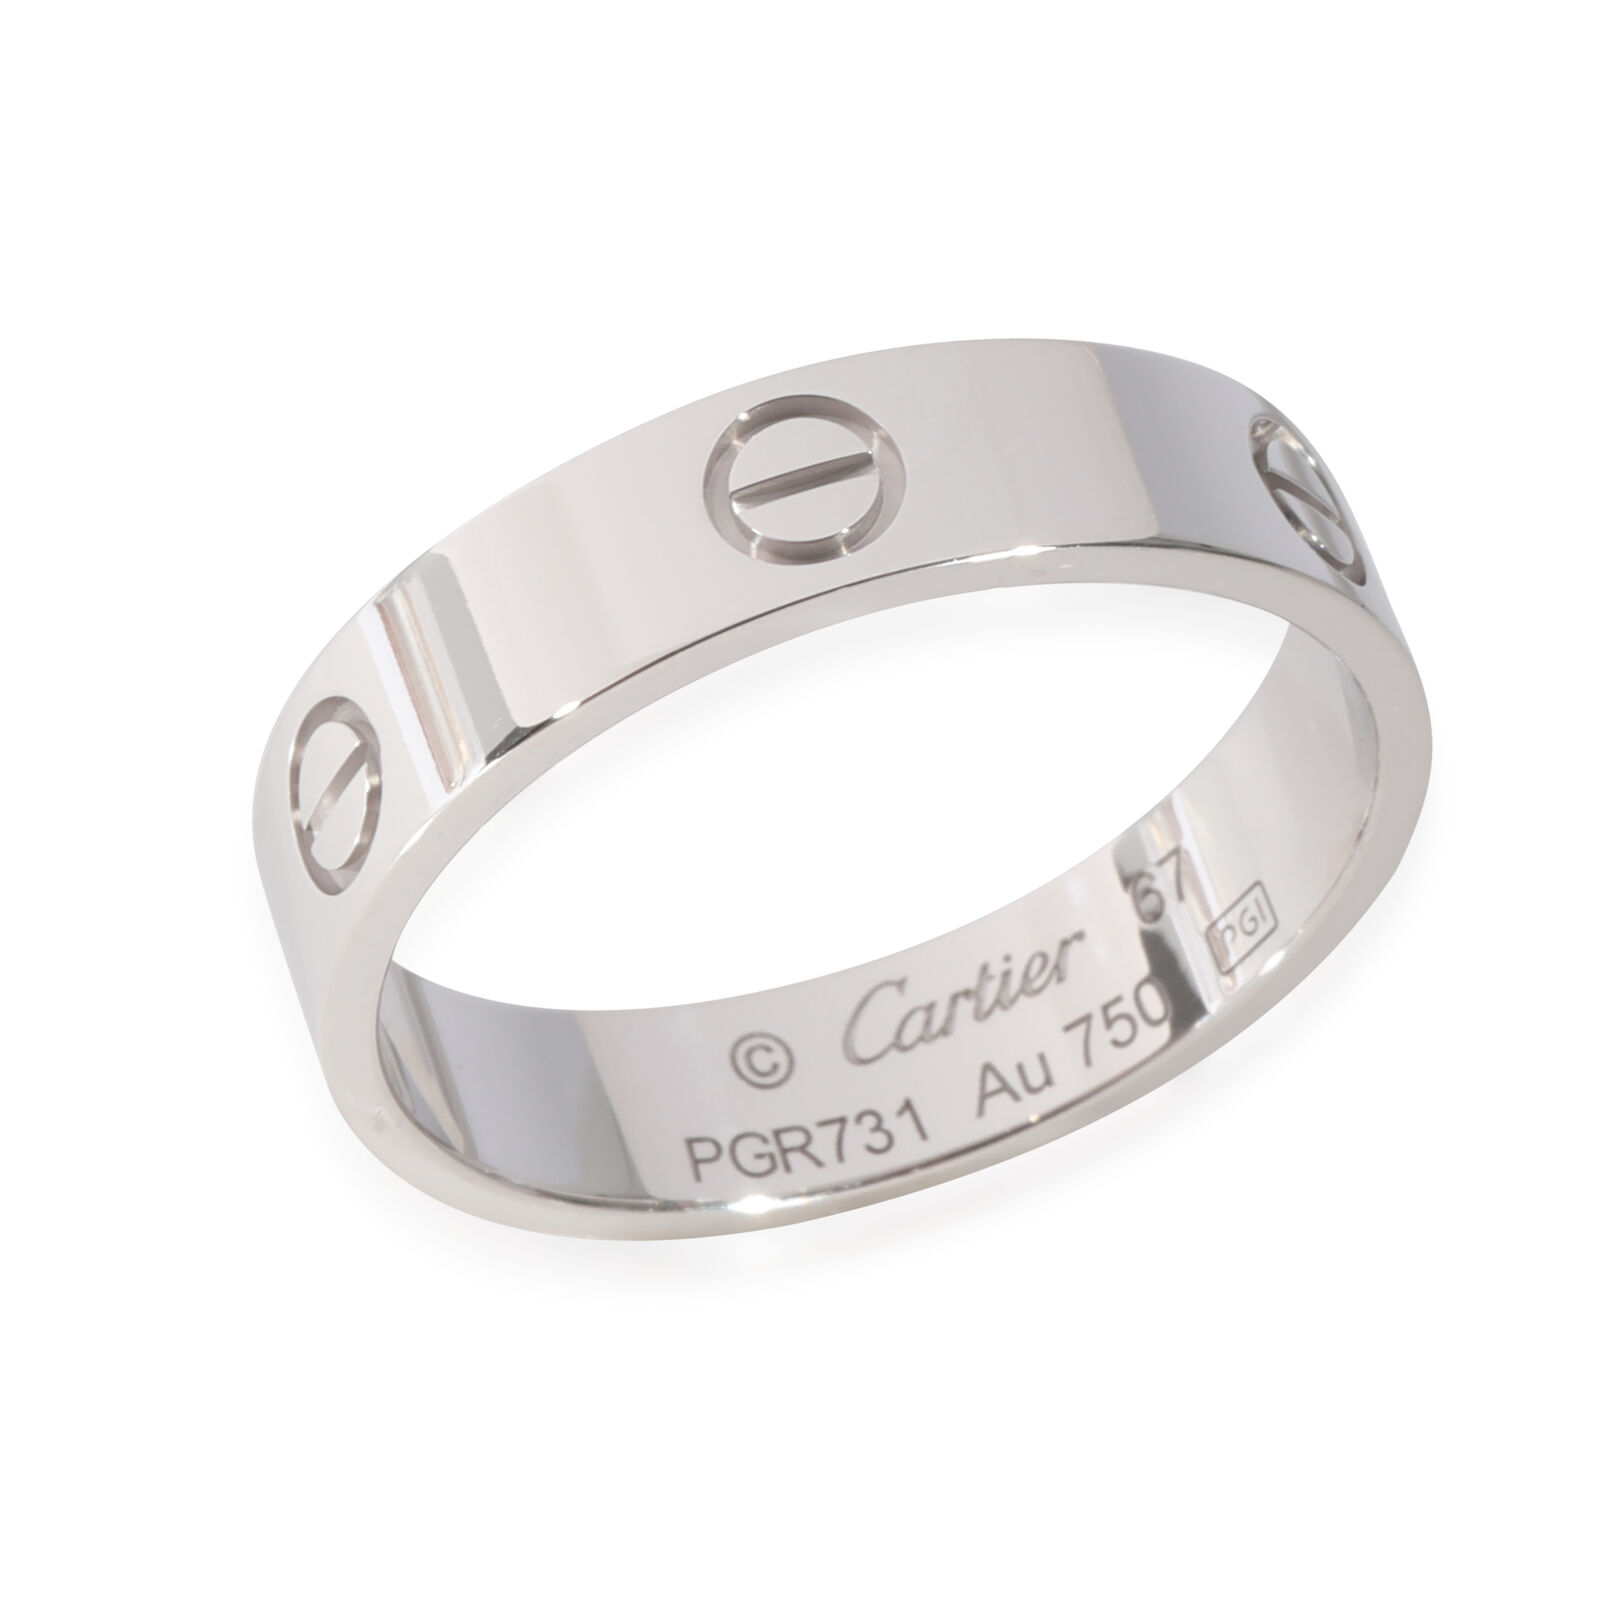 Cartier Love Ring in 18k White Gold - image 3